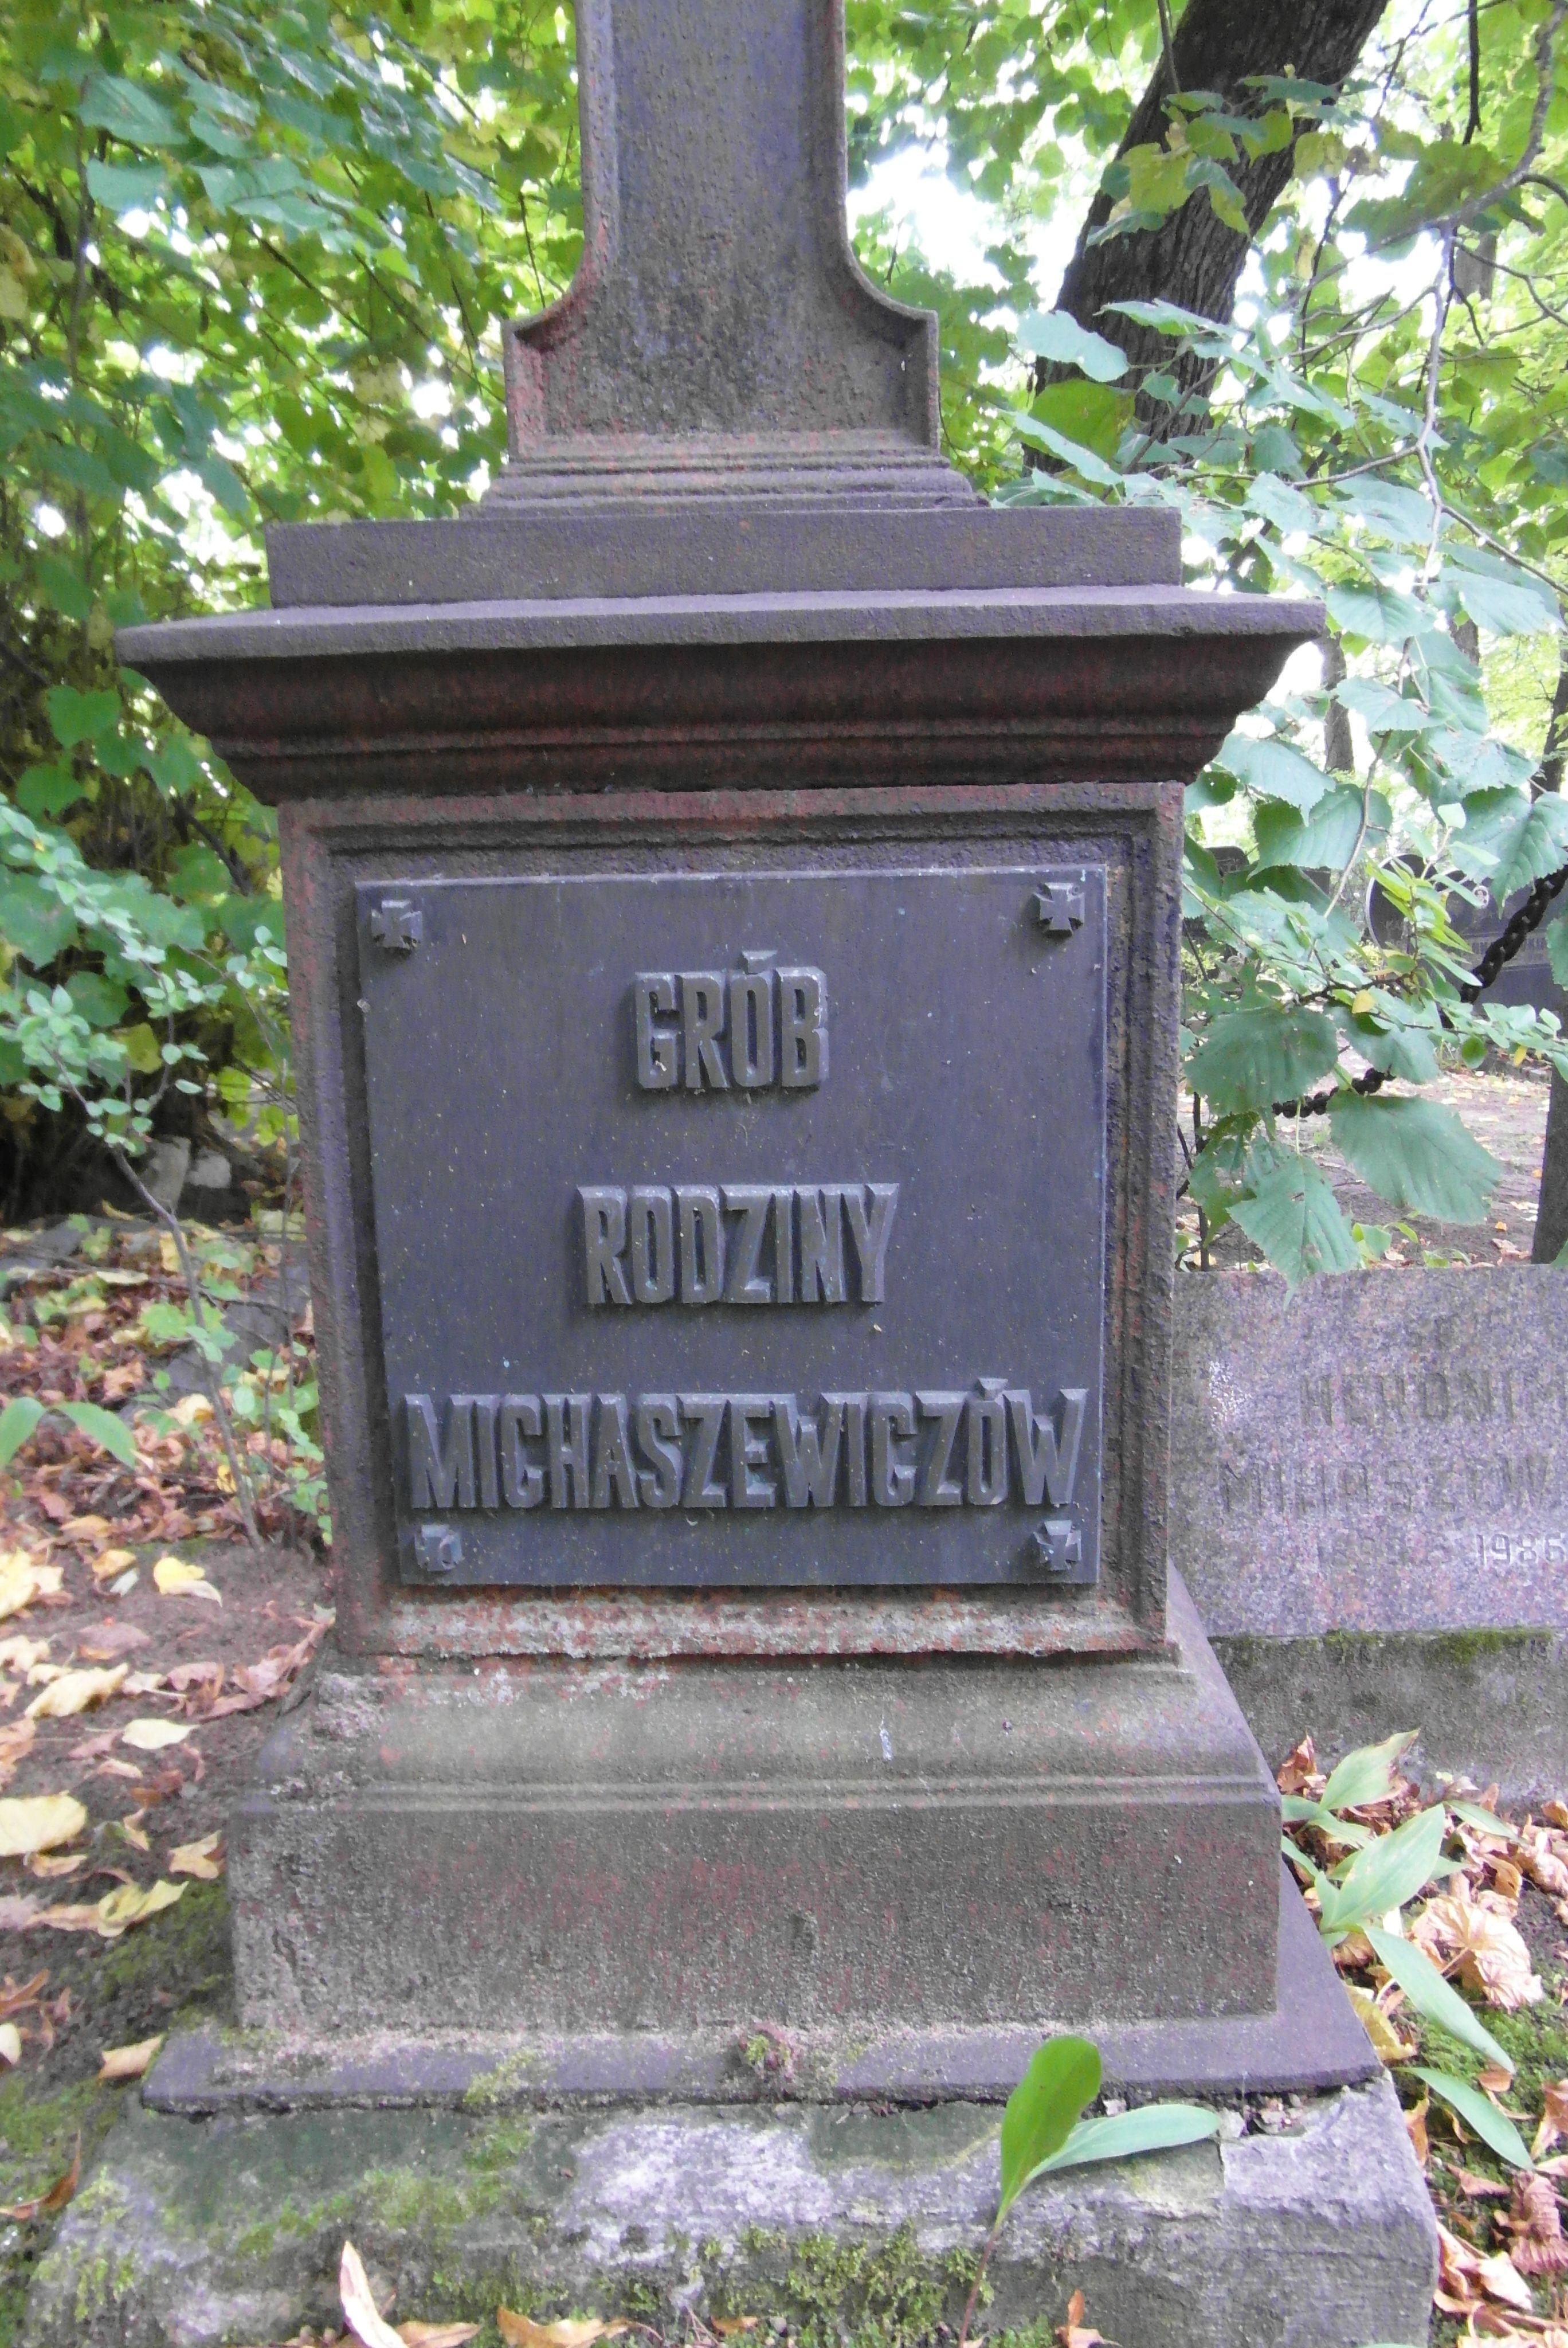 Inscription from the tombstone of the Mikhasevich family, St Michael's cemetery in Riga, as of 2021.